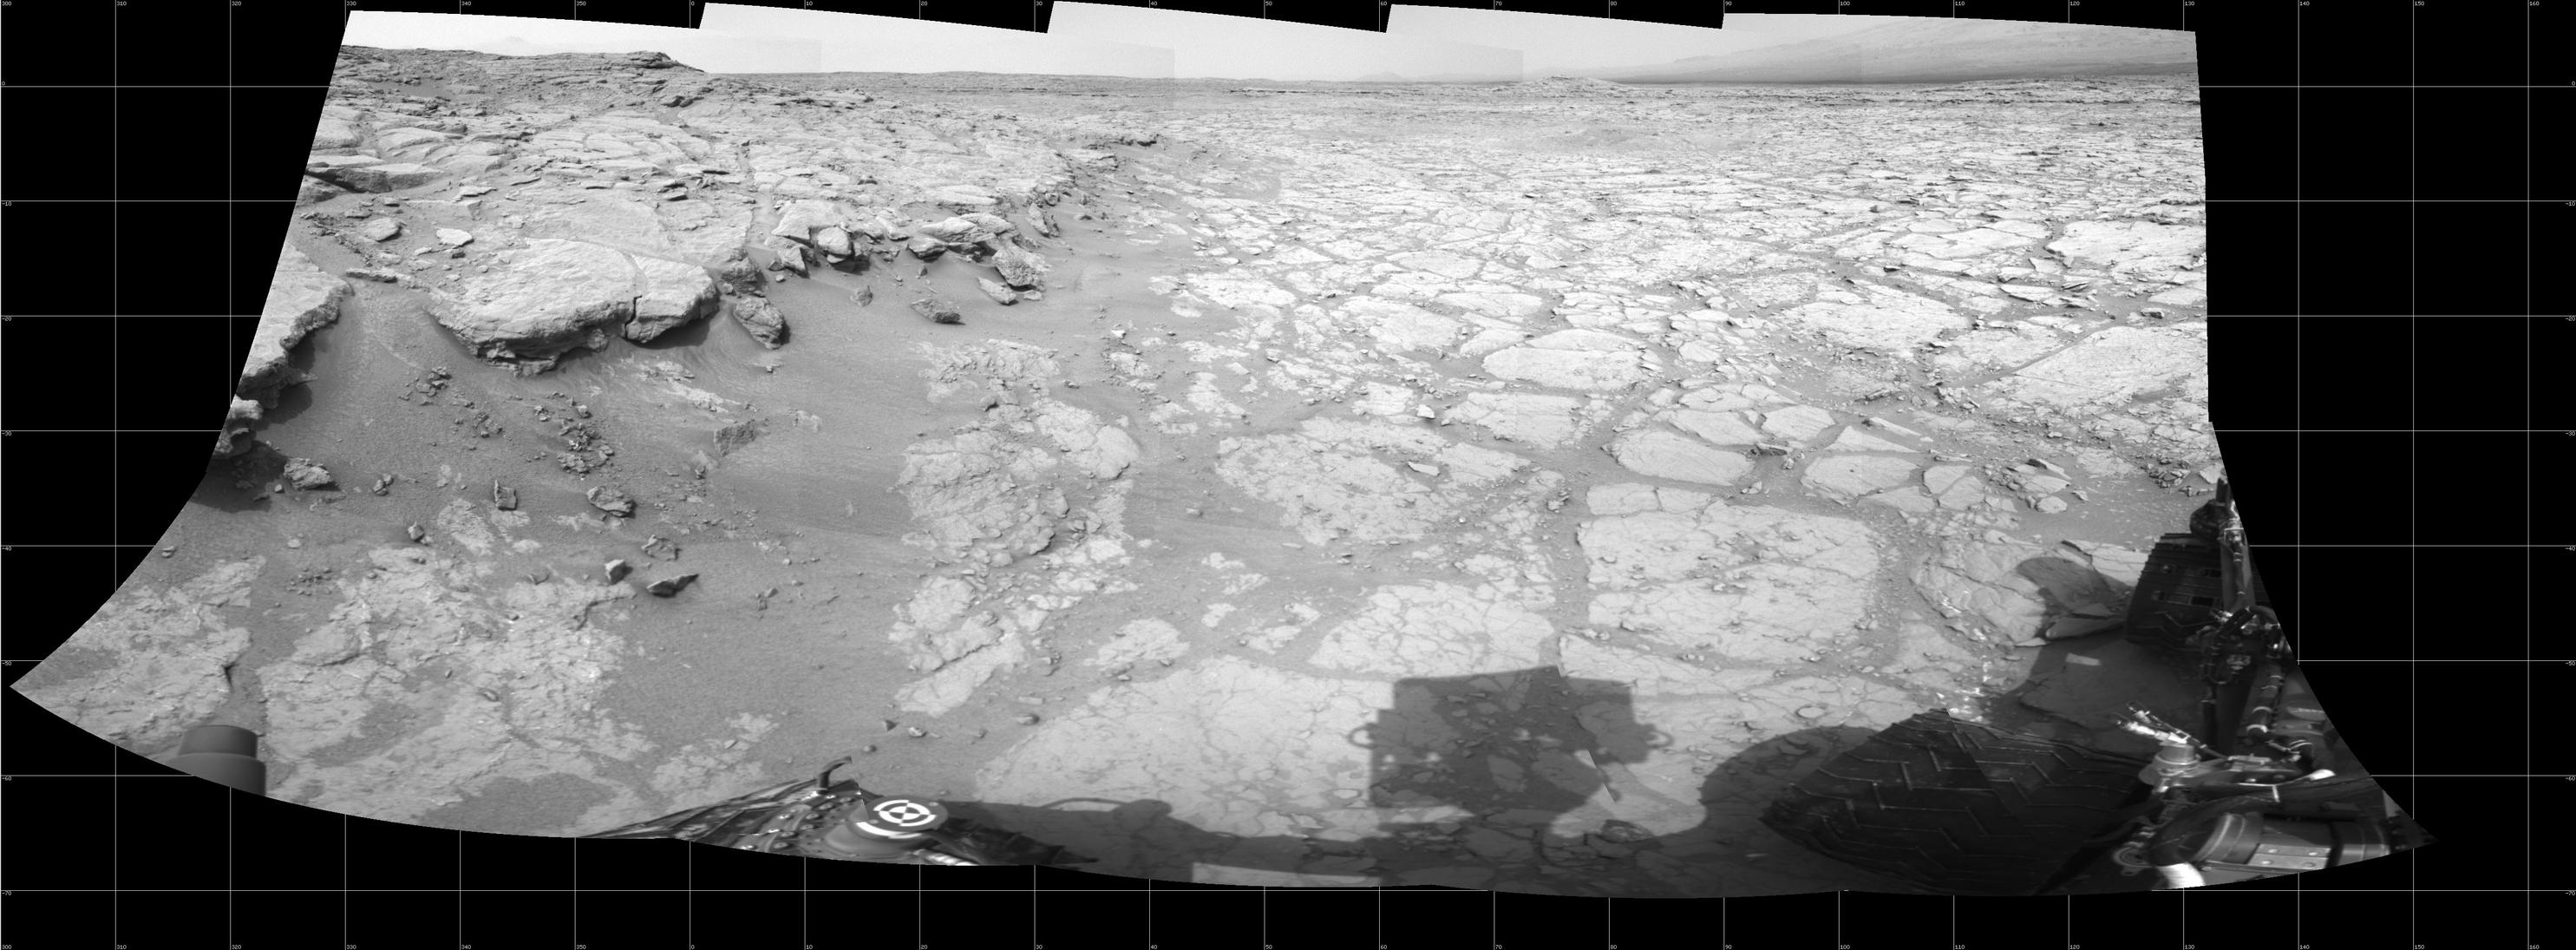 In a shallow depression called "Yellowknife Bay," the NASA Mars rover Curiosity drove to an edge of the feature during the 130th Martian day, or sol, of the mission (Dec. 17, 2012) and used its Navigation Camera to record this view of the ledge at the margin and a view across the "bay."